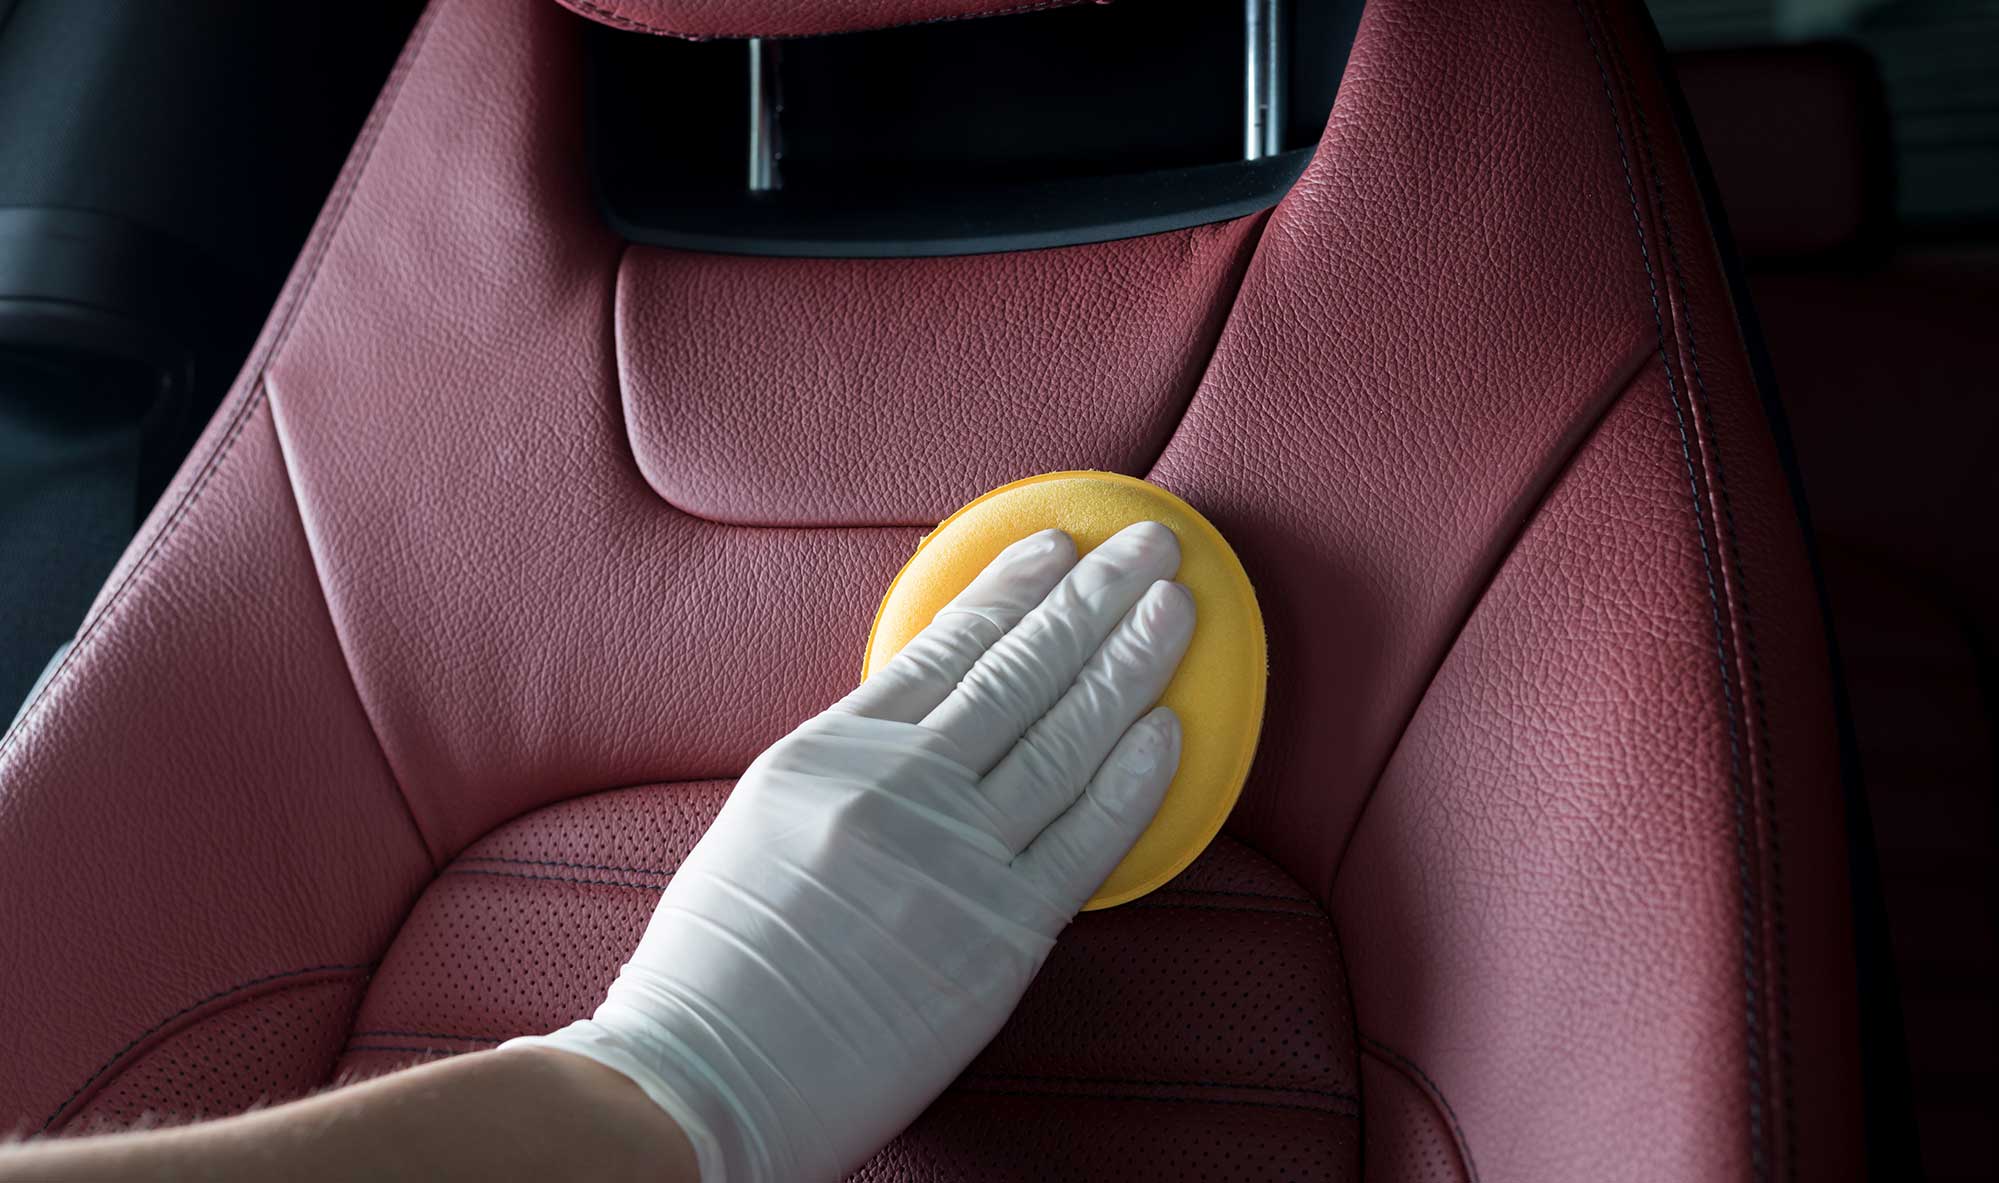 Leather Car Seats: How to Maintain Them